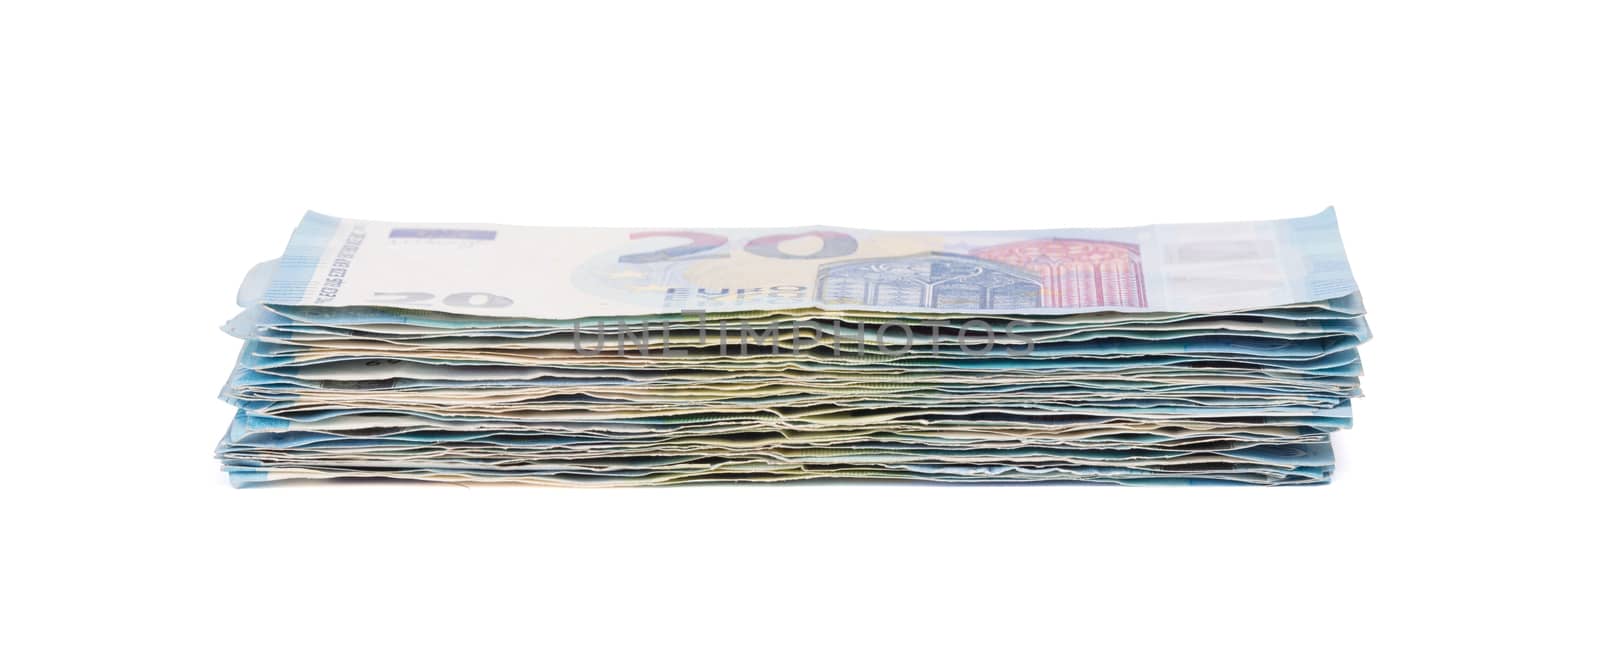 Stack of euro banknotes by michaklootwijk